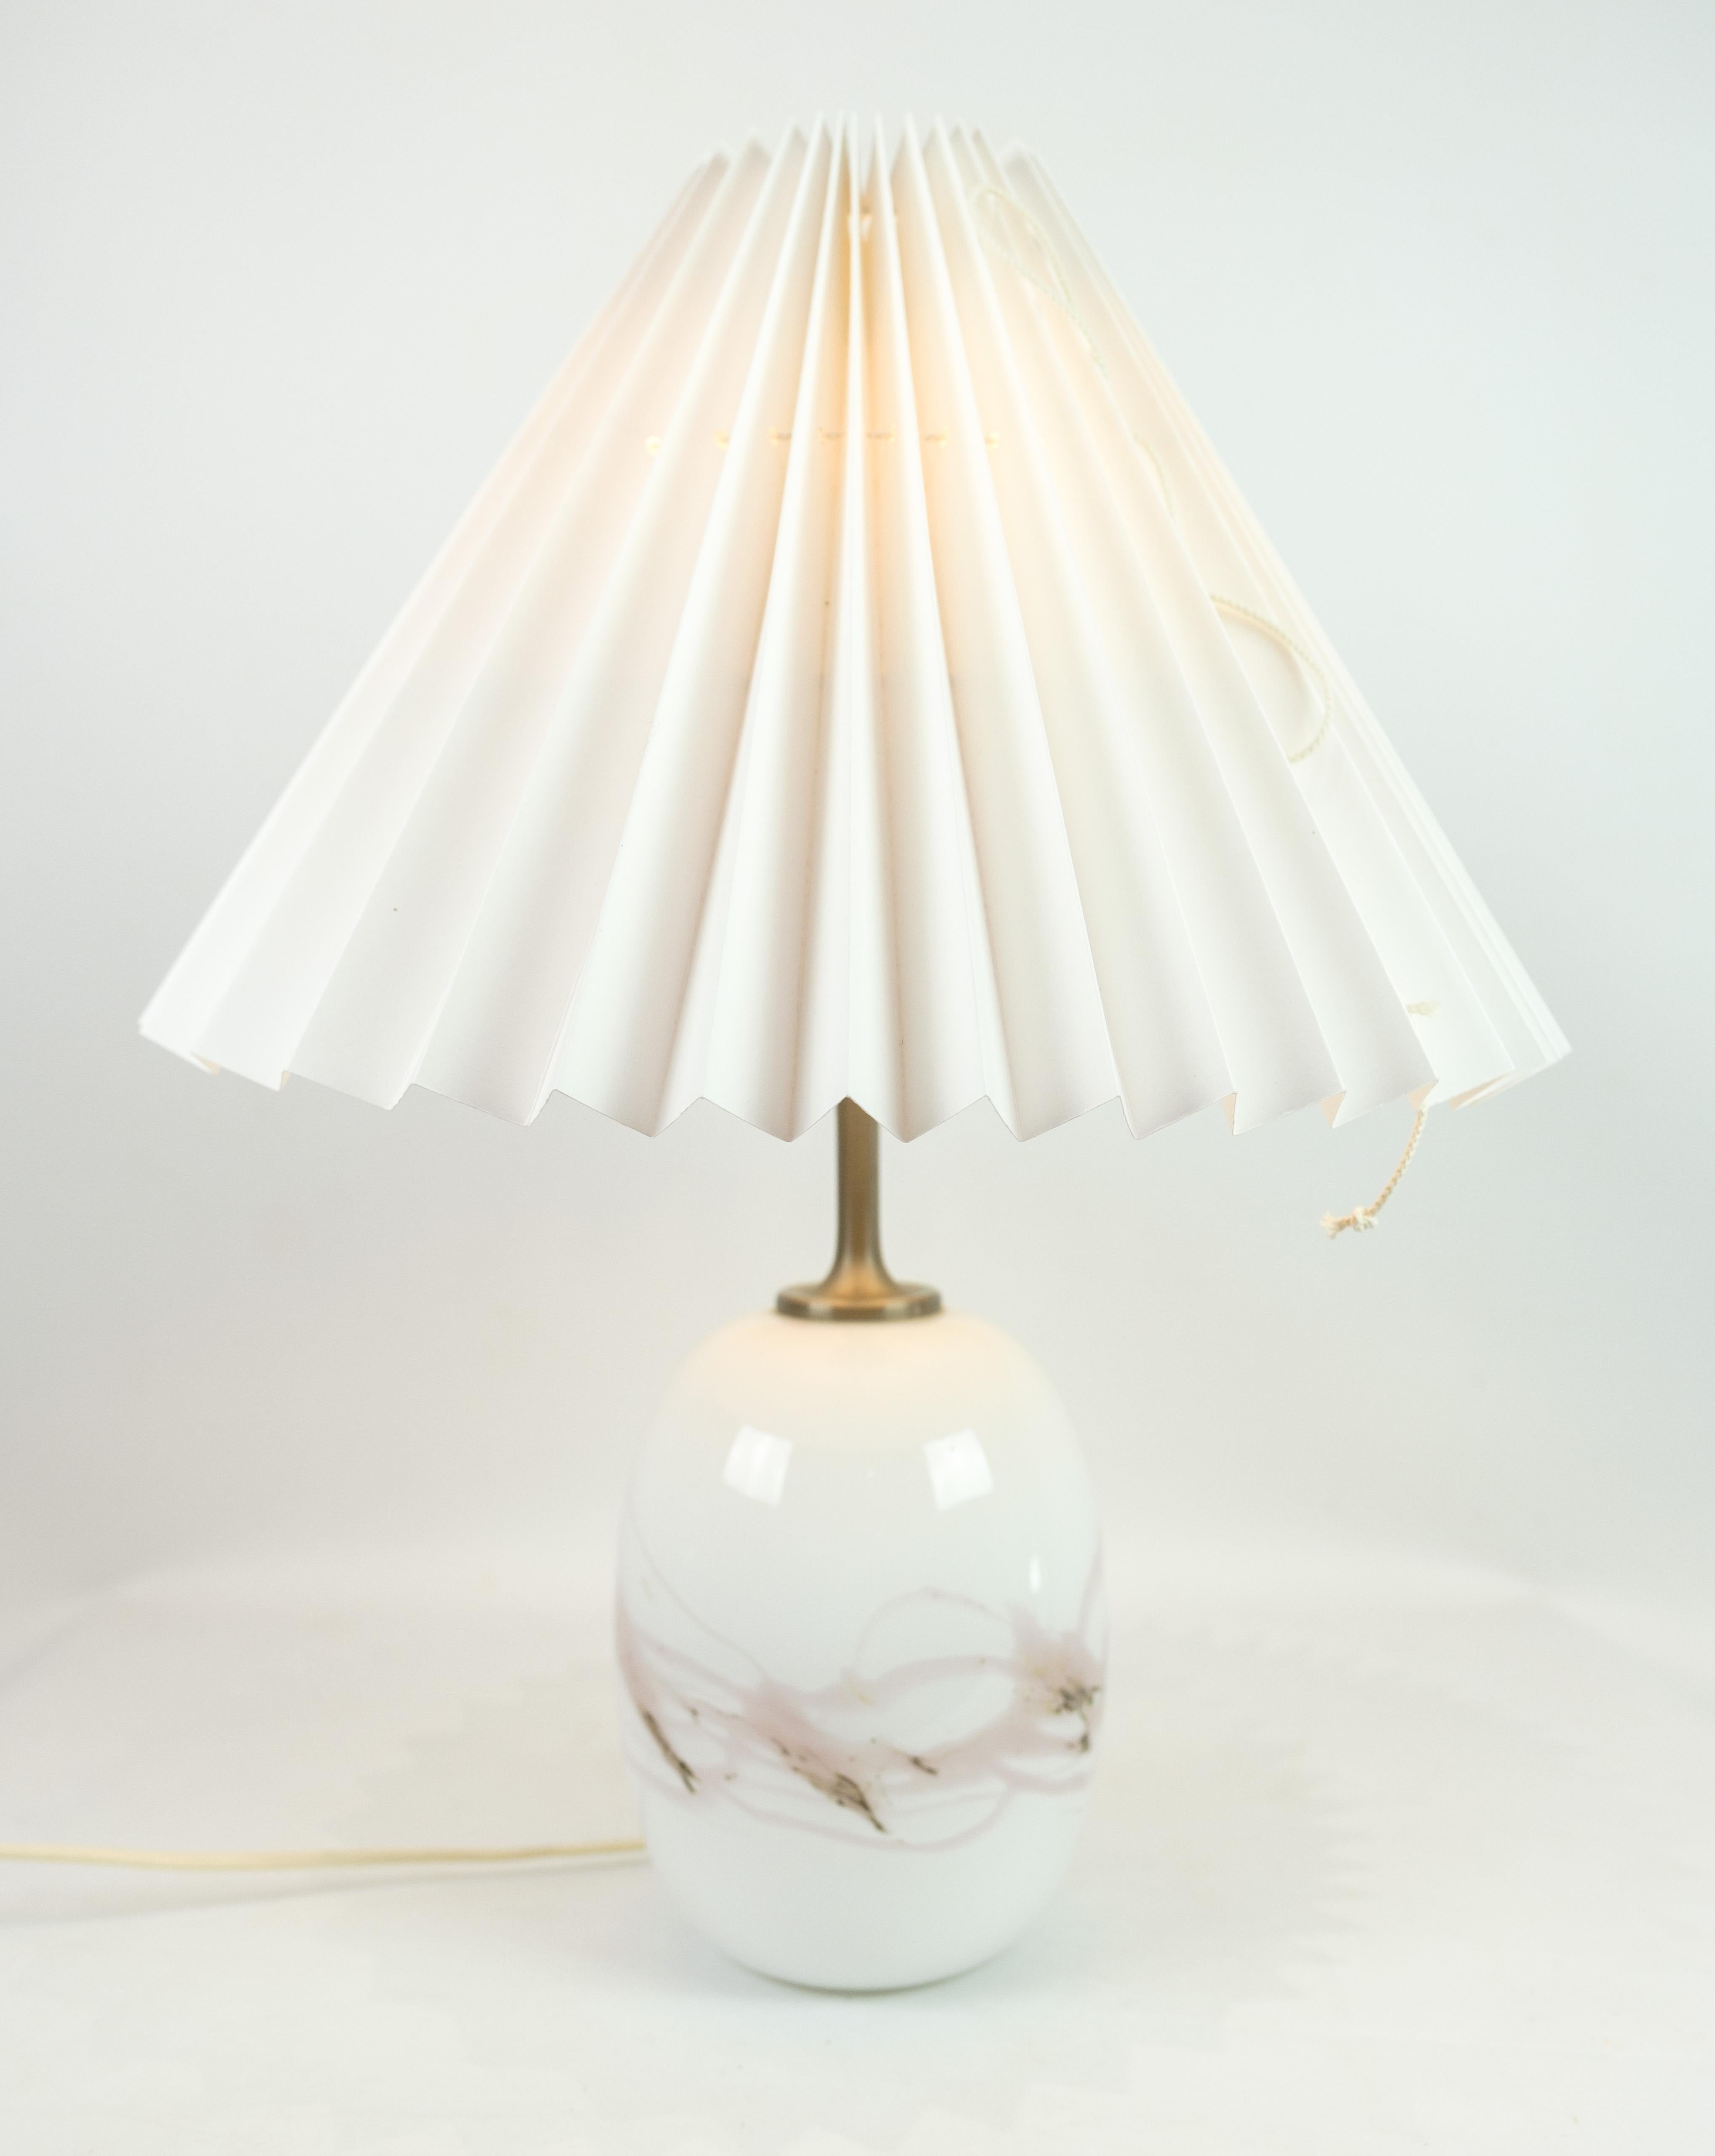 Table lamp, model Sakura, designed by Michael Bang with white opal glass with pink decoration.